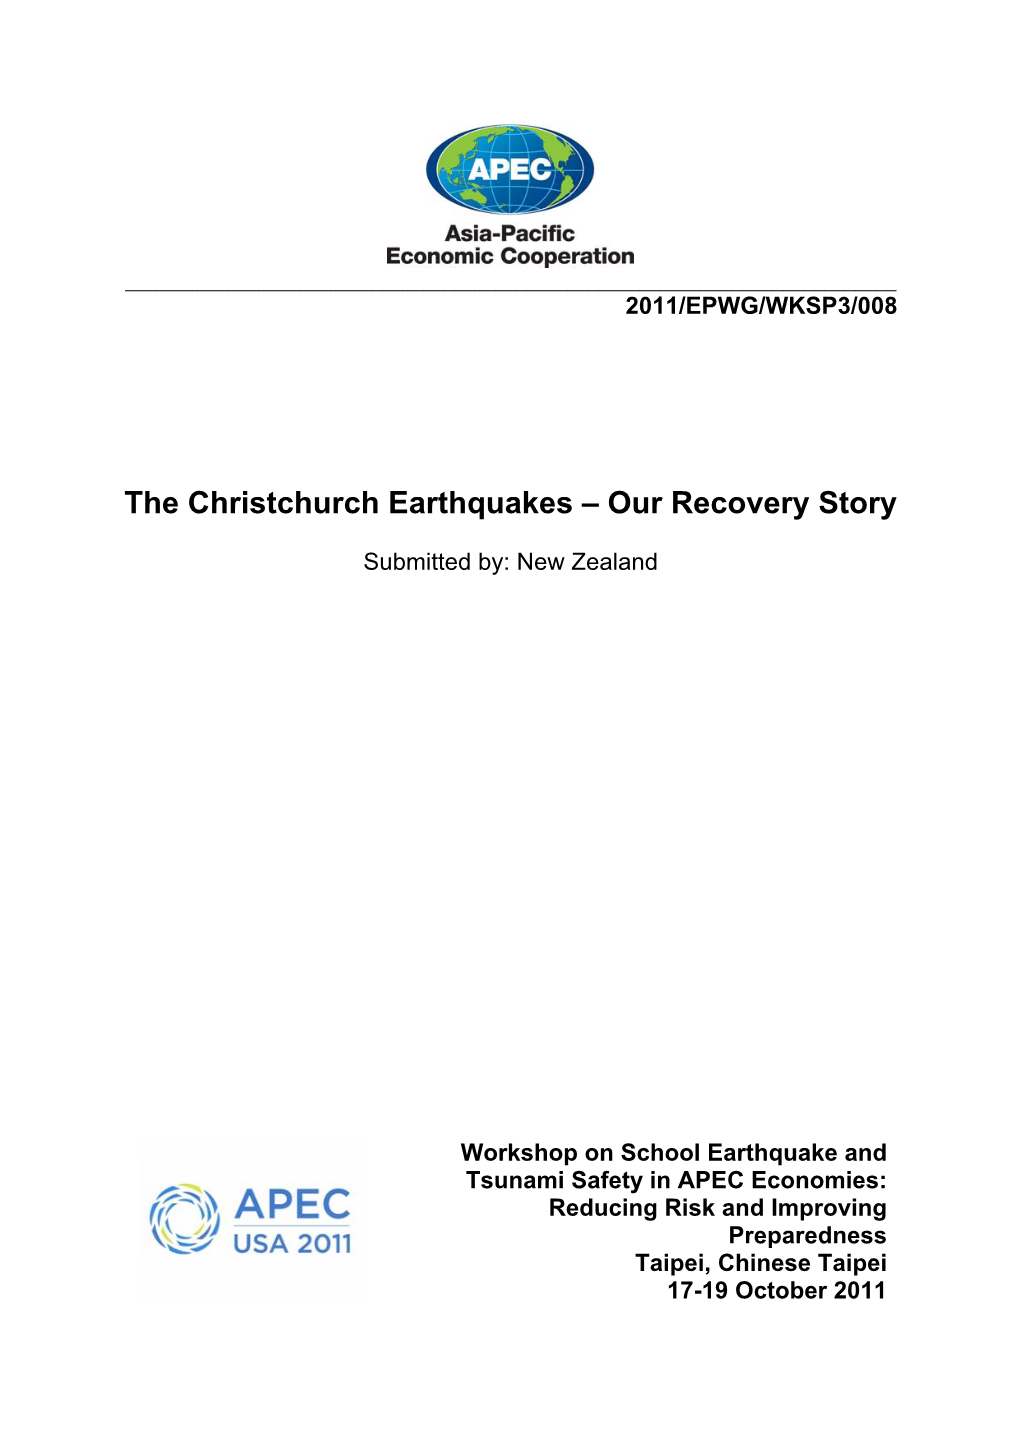 The Christchurch Earthquakes – Our Recovery Story